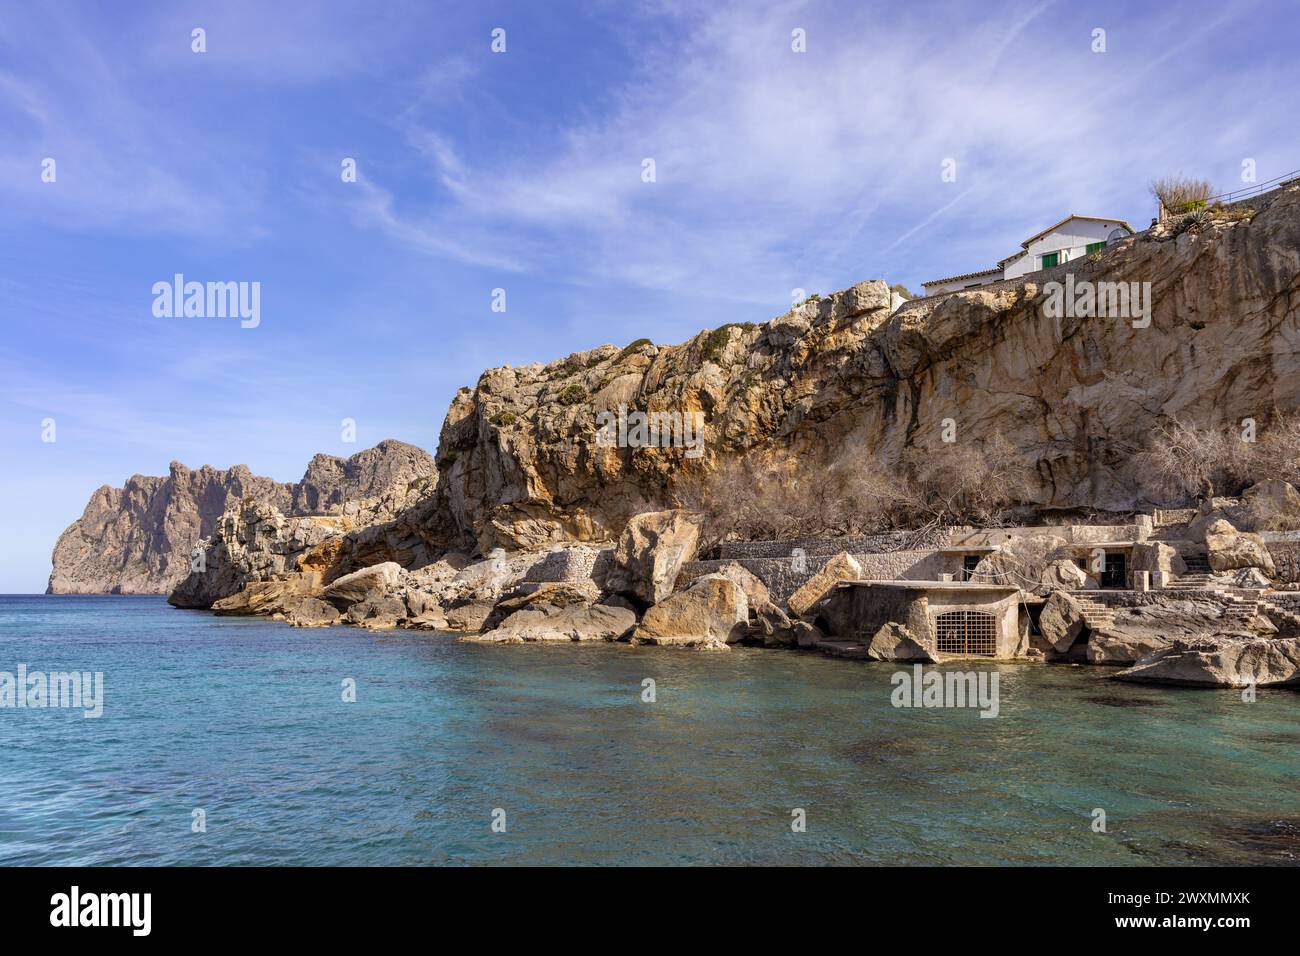 Bay of Cala Carbo at Cala Sant Vicenç on the island of Mallorca, Balearic Islands, Spain. Stock Photo